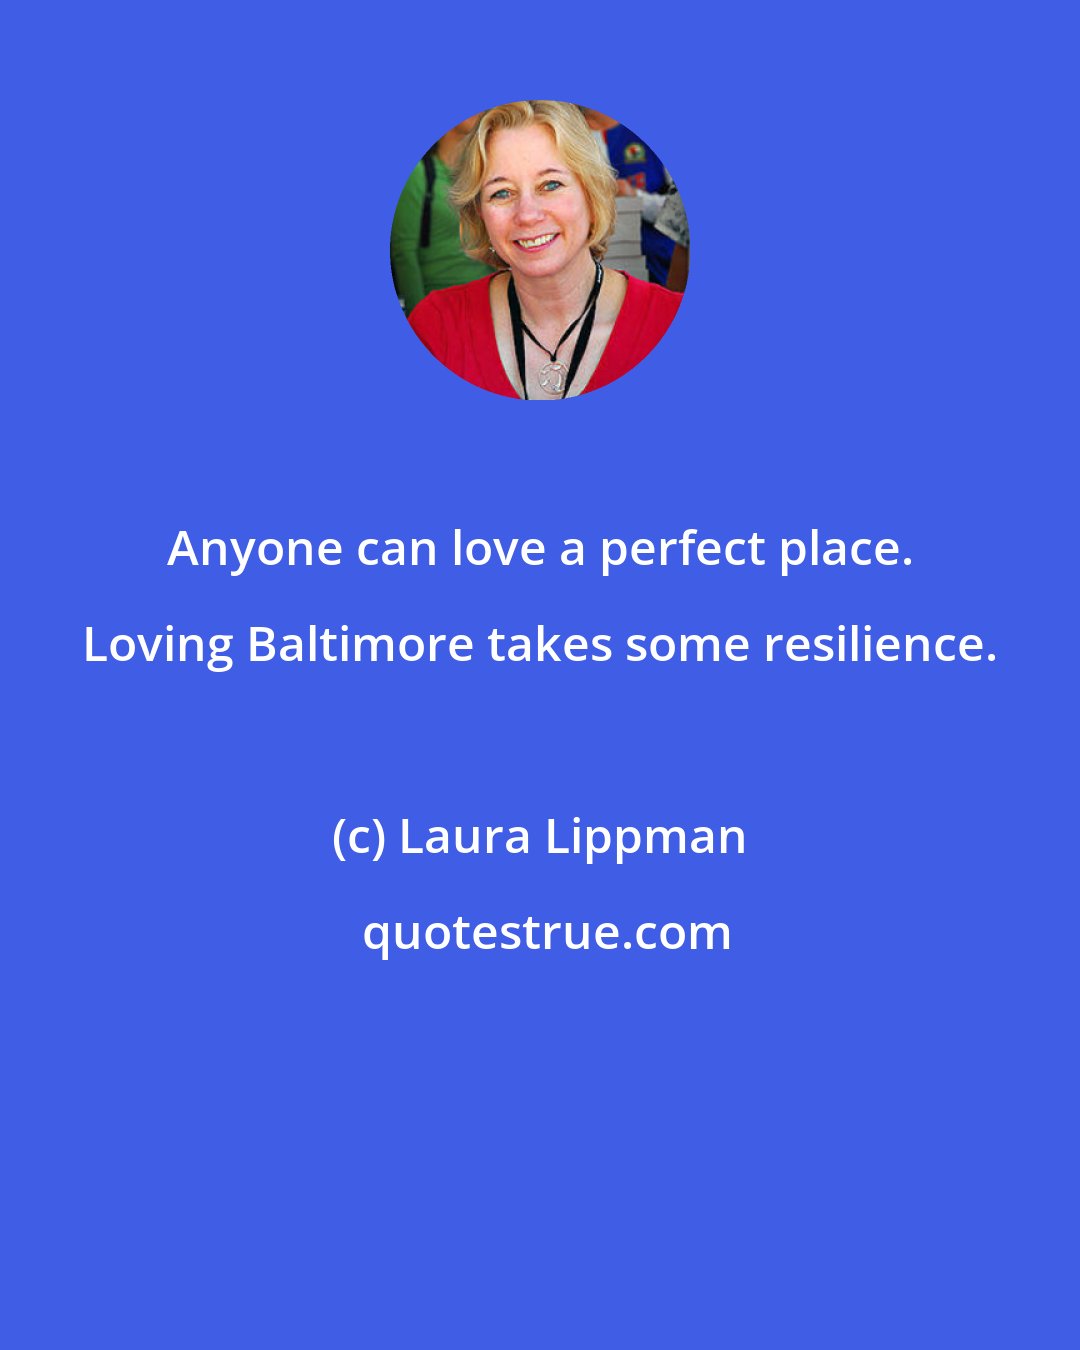 Laura Lippman: Anyone can love a perfect place. Loving Baltimore takes some resilience.